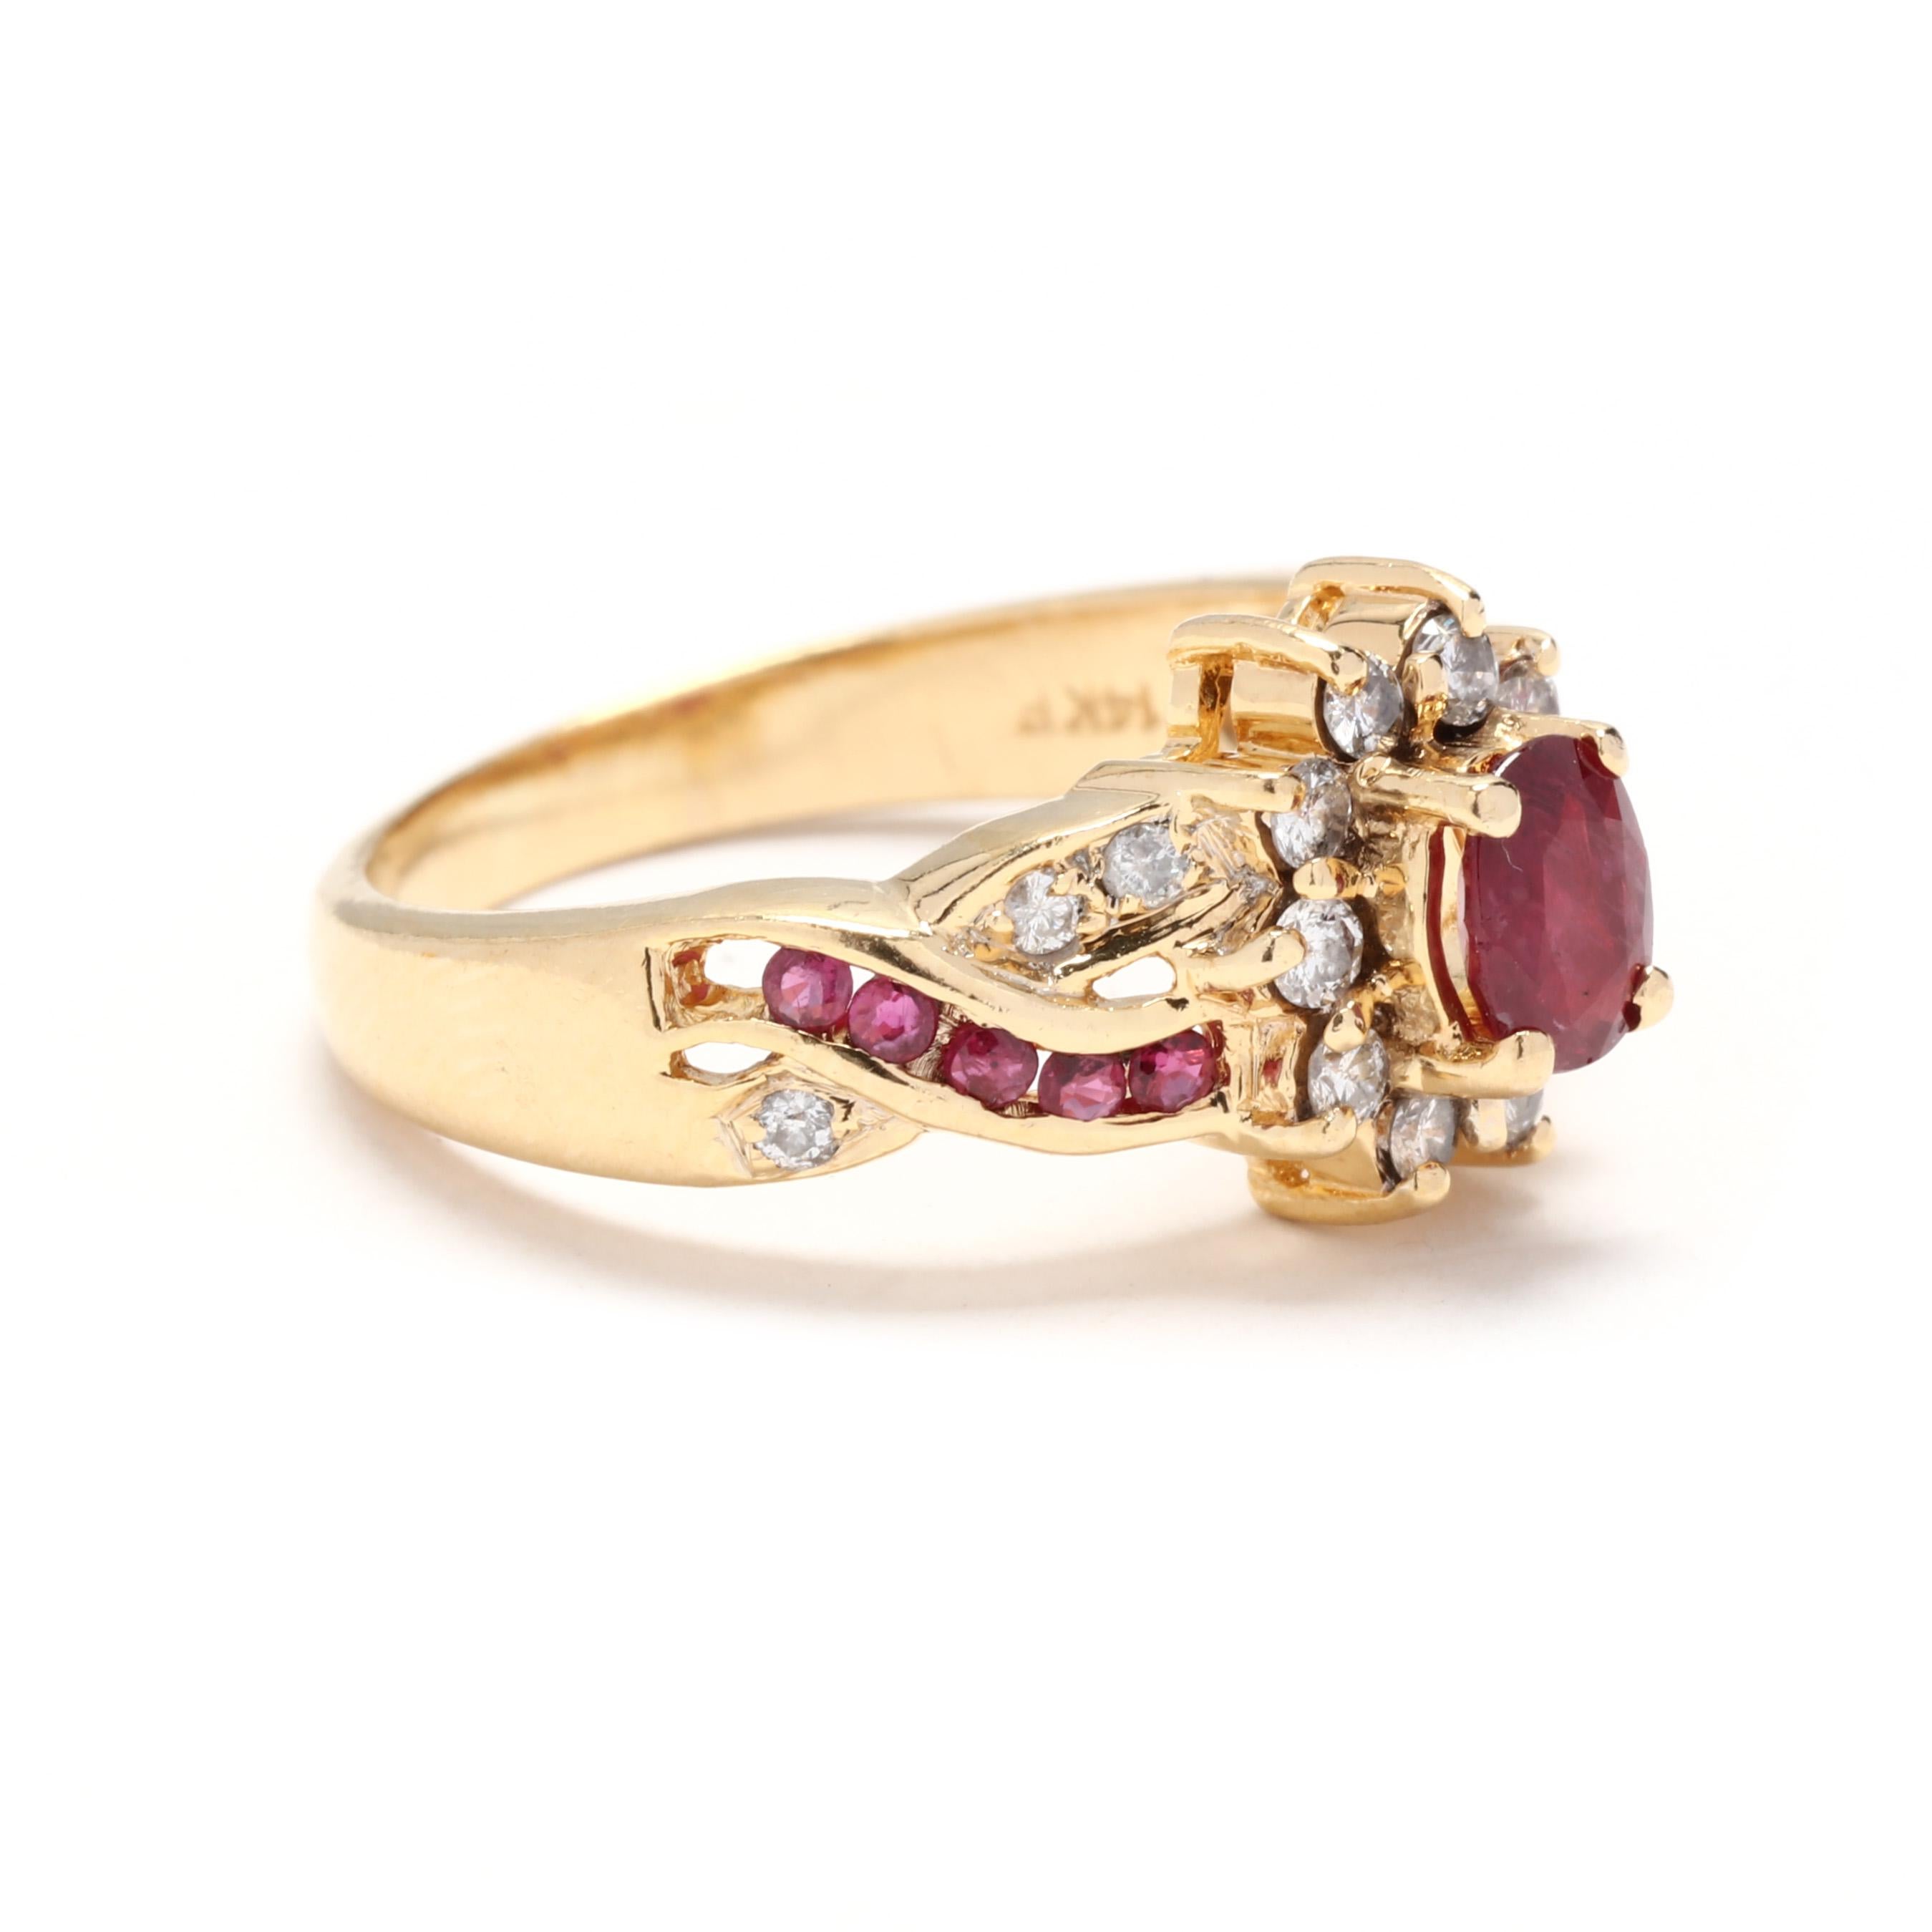 A vintage 14 karat yellow gold oval ruby and diamond cocktail ring. This July birthstone ring features a prong set, oval cut ruby weighing approximately .48 carat surrounded by a halo of round brilliant cut diamonds and with a criss cross band set